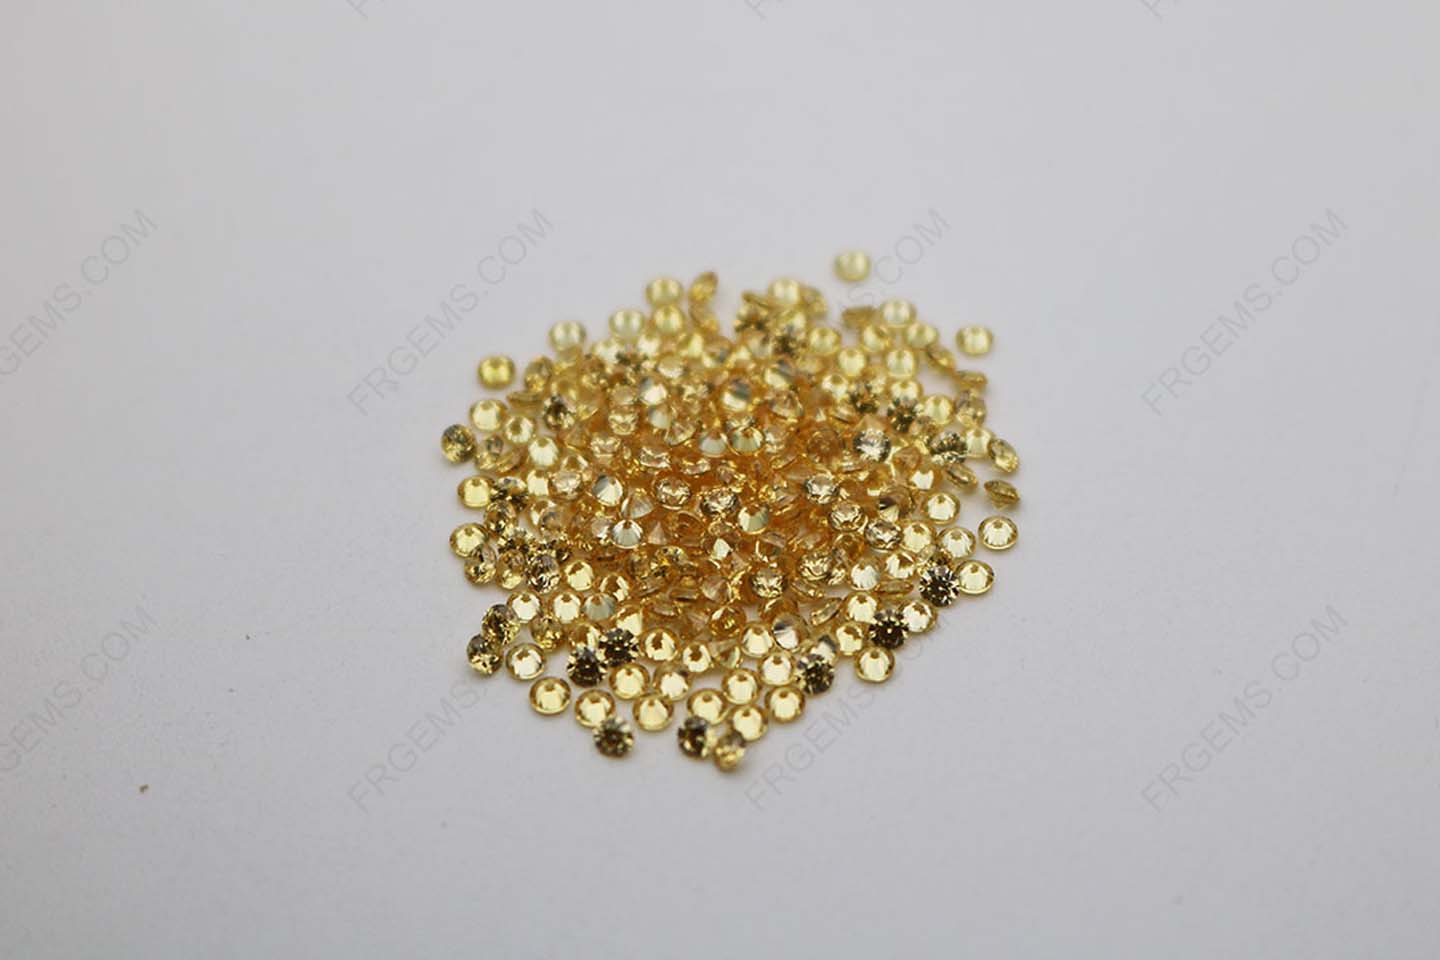 Cubic Zirconia Golden Yellow Round Shape faceted diamond Cut 2mm Melee stones CZ05 IMG_1029